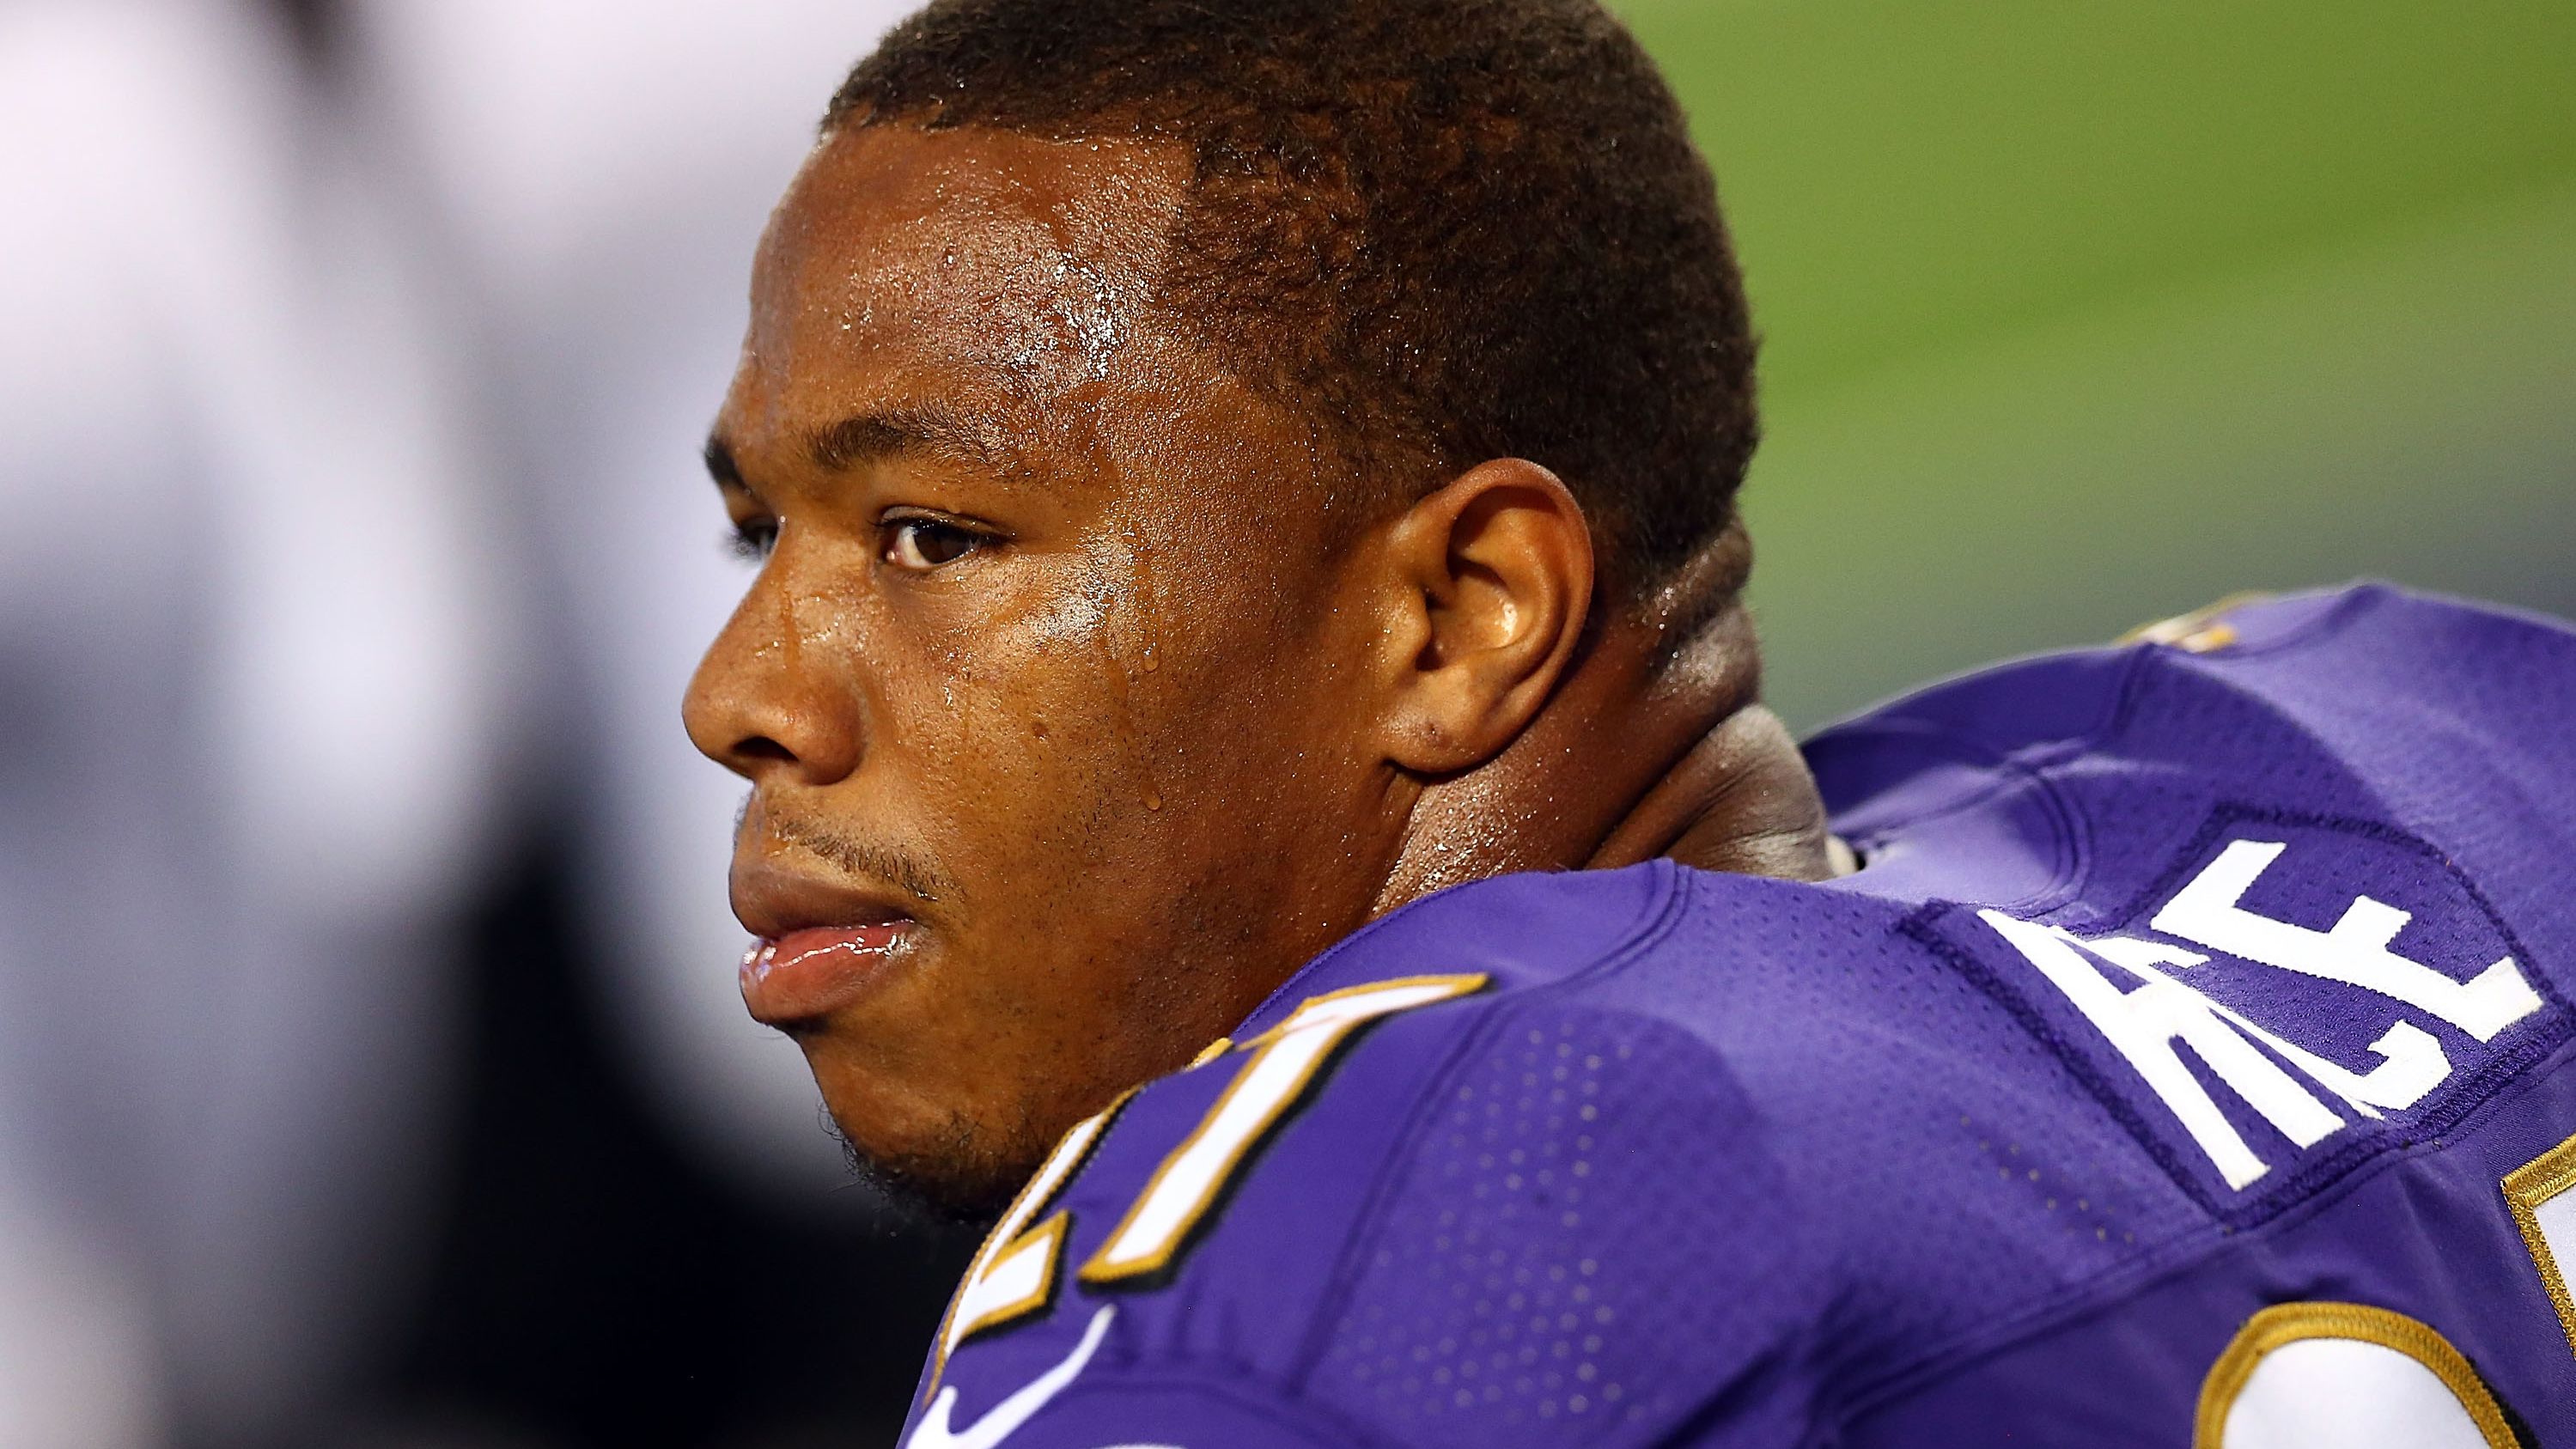 Ray Rice was released by the Baltimore Ravens after TMZ published video of him knocking his then-fiancee unconscious in 2014.